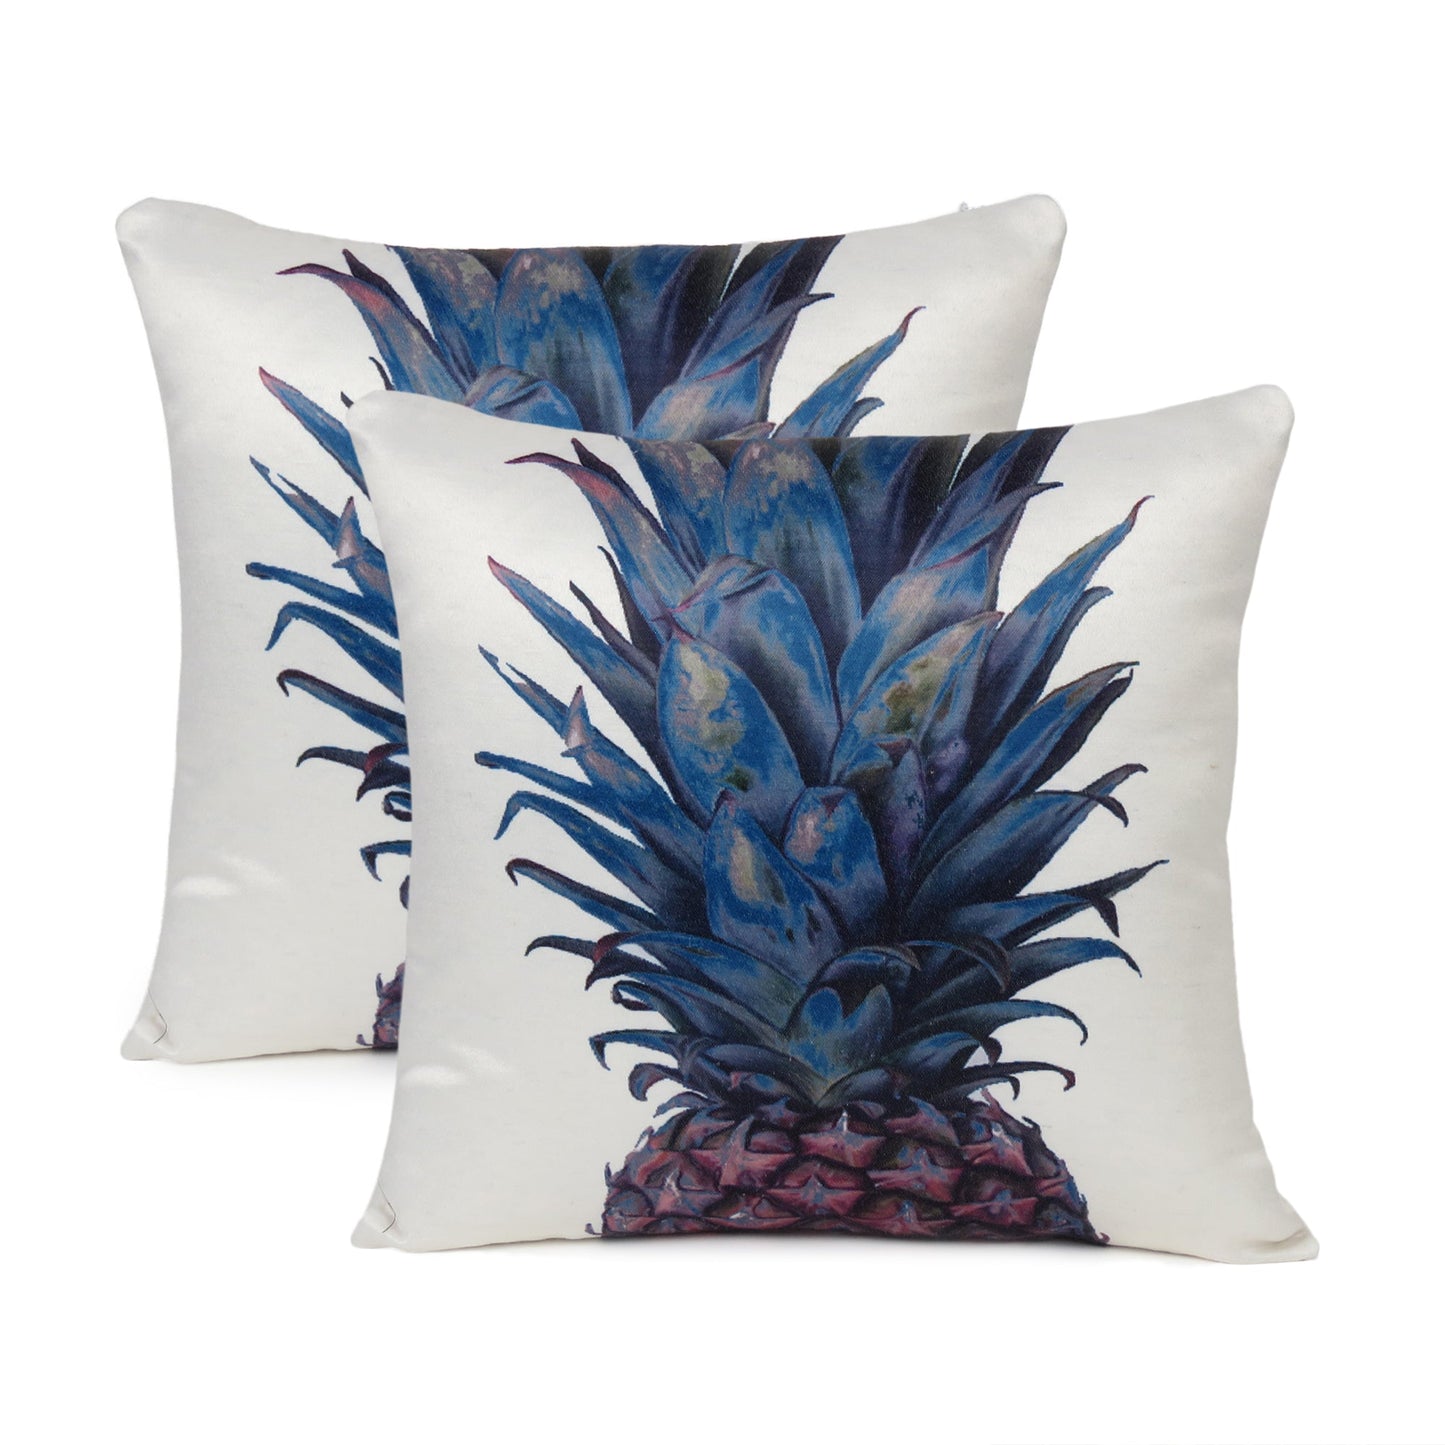 Blue Pineapple Printed Cushion Cover in Set of 2